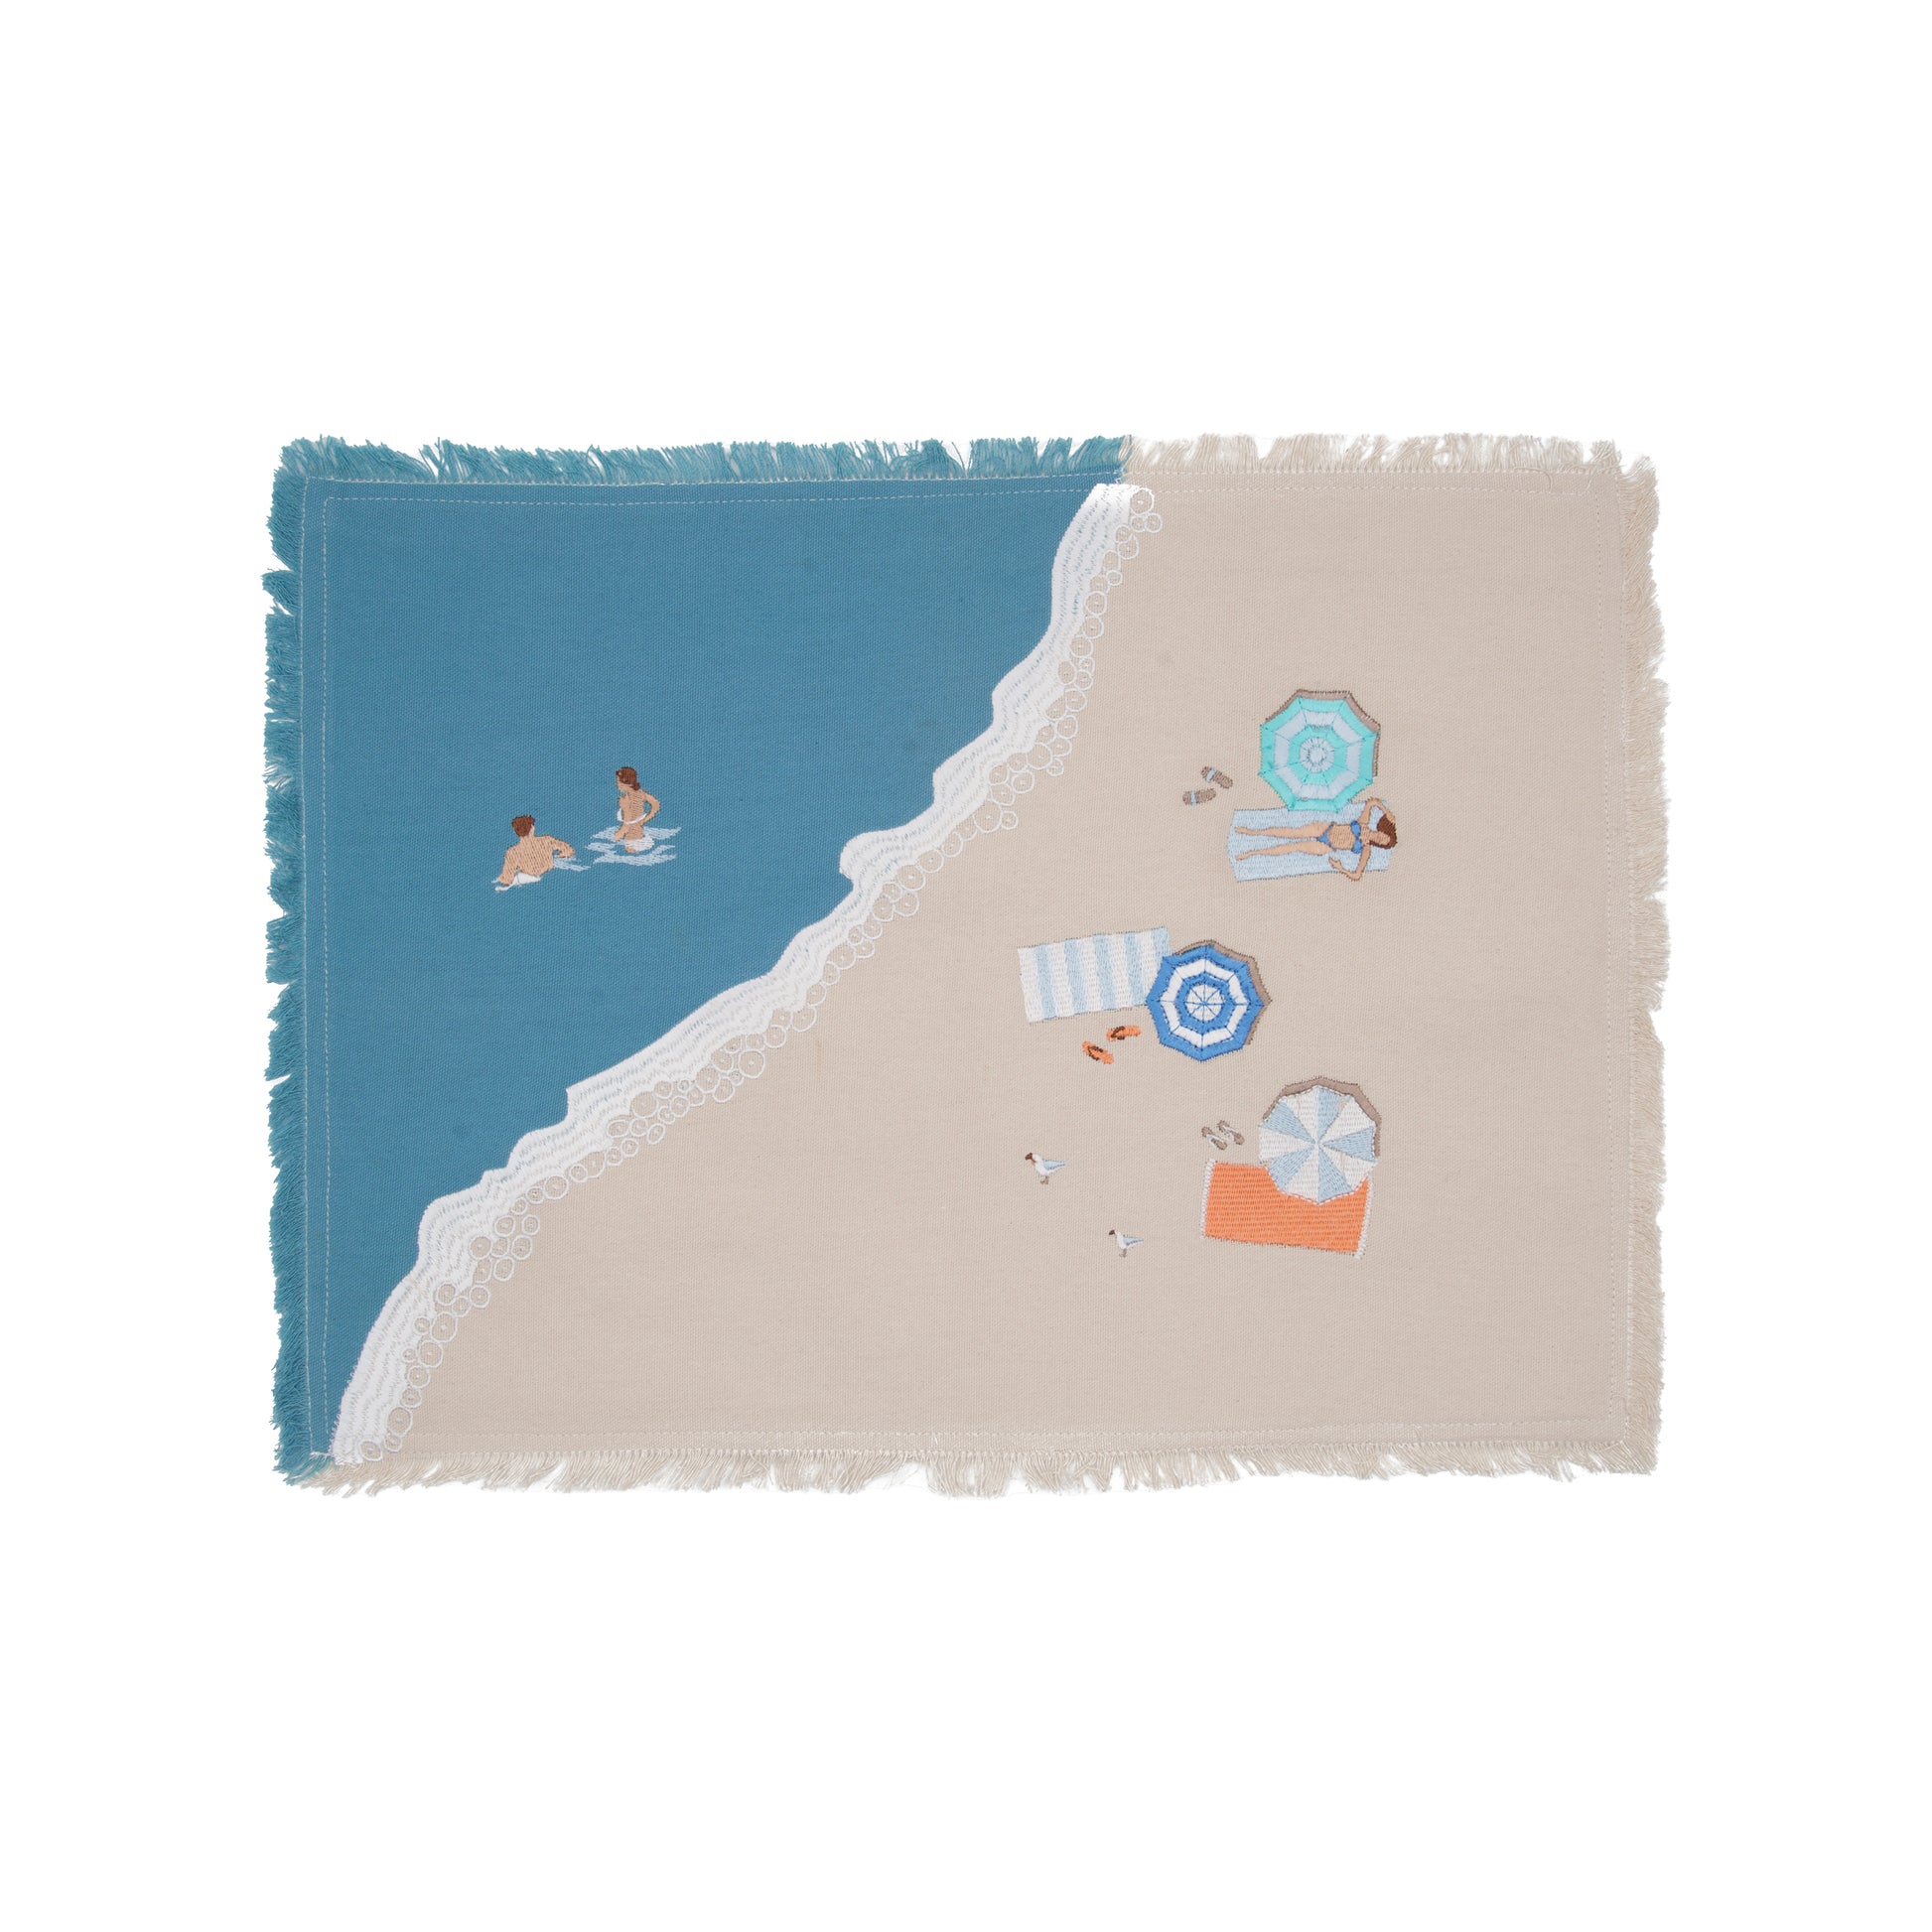 Colorful beach umbrellas, towels, and sun bathers embroidered on a sandy beach scene of natural and blue cotton on a fringed placemat.